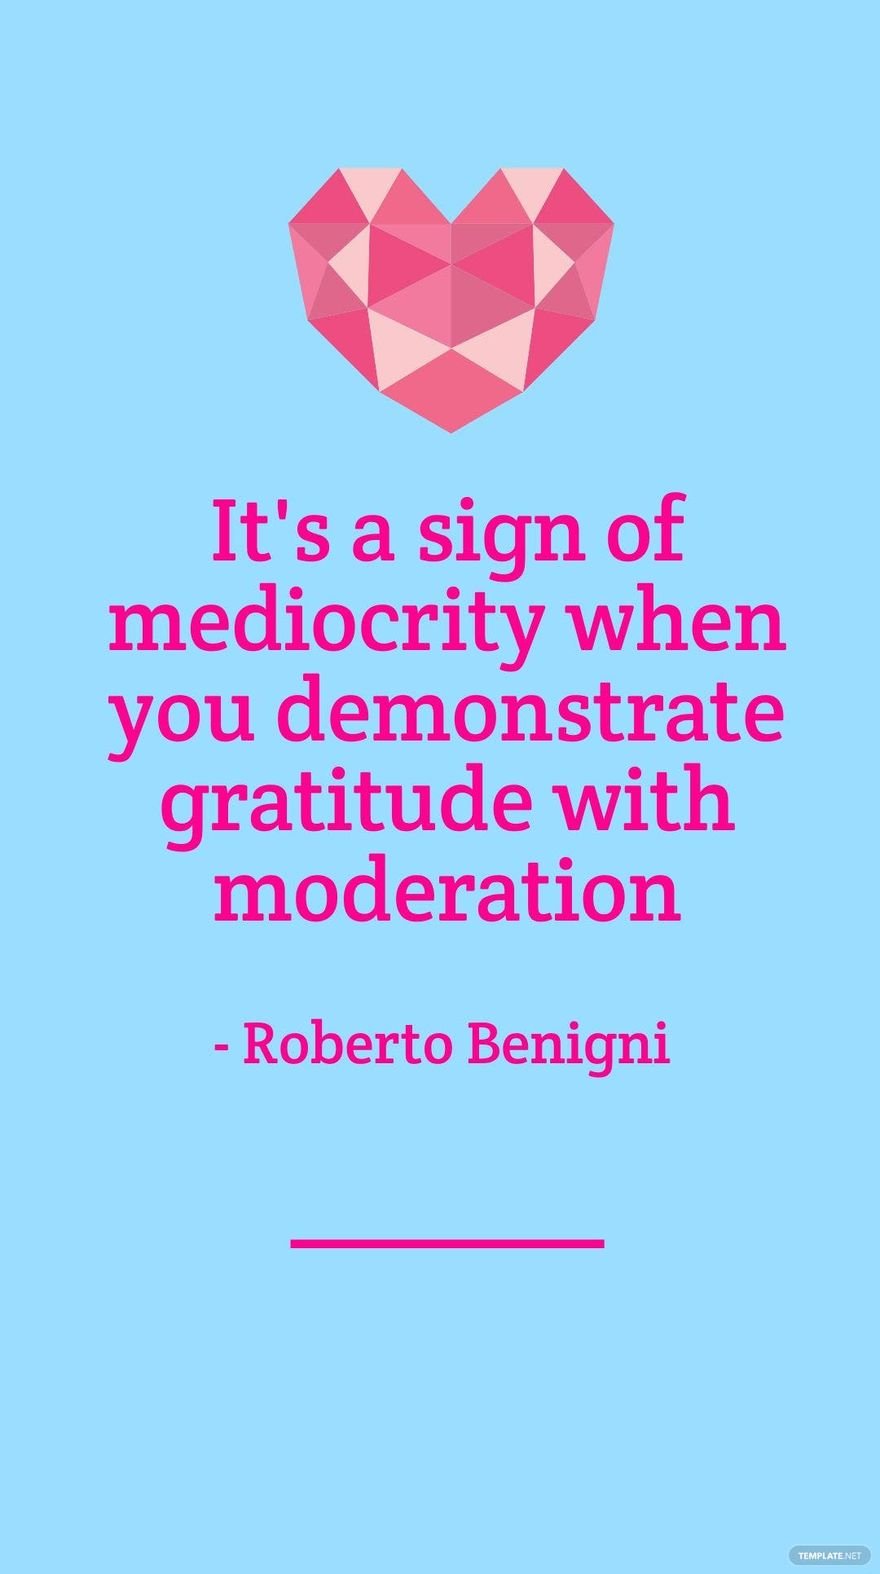 Free Roberto Benigni - It's a sign of mediocrity when you demonstrate gratitude with moderation in JPG